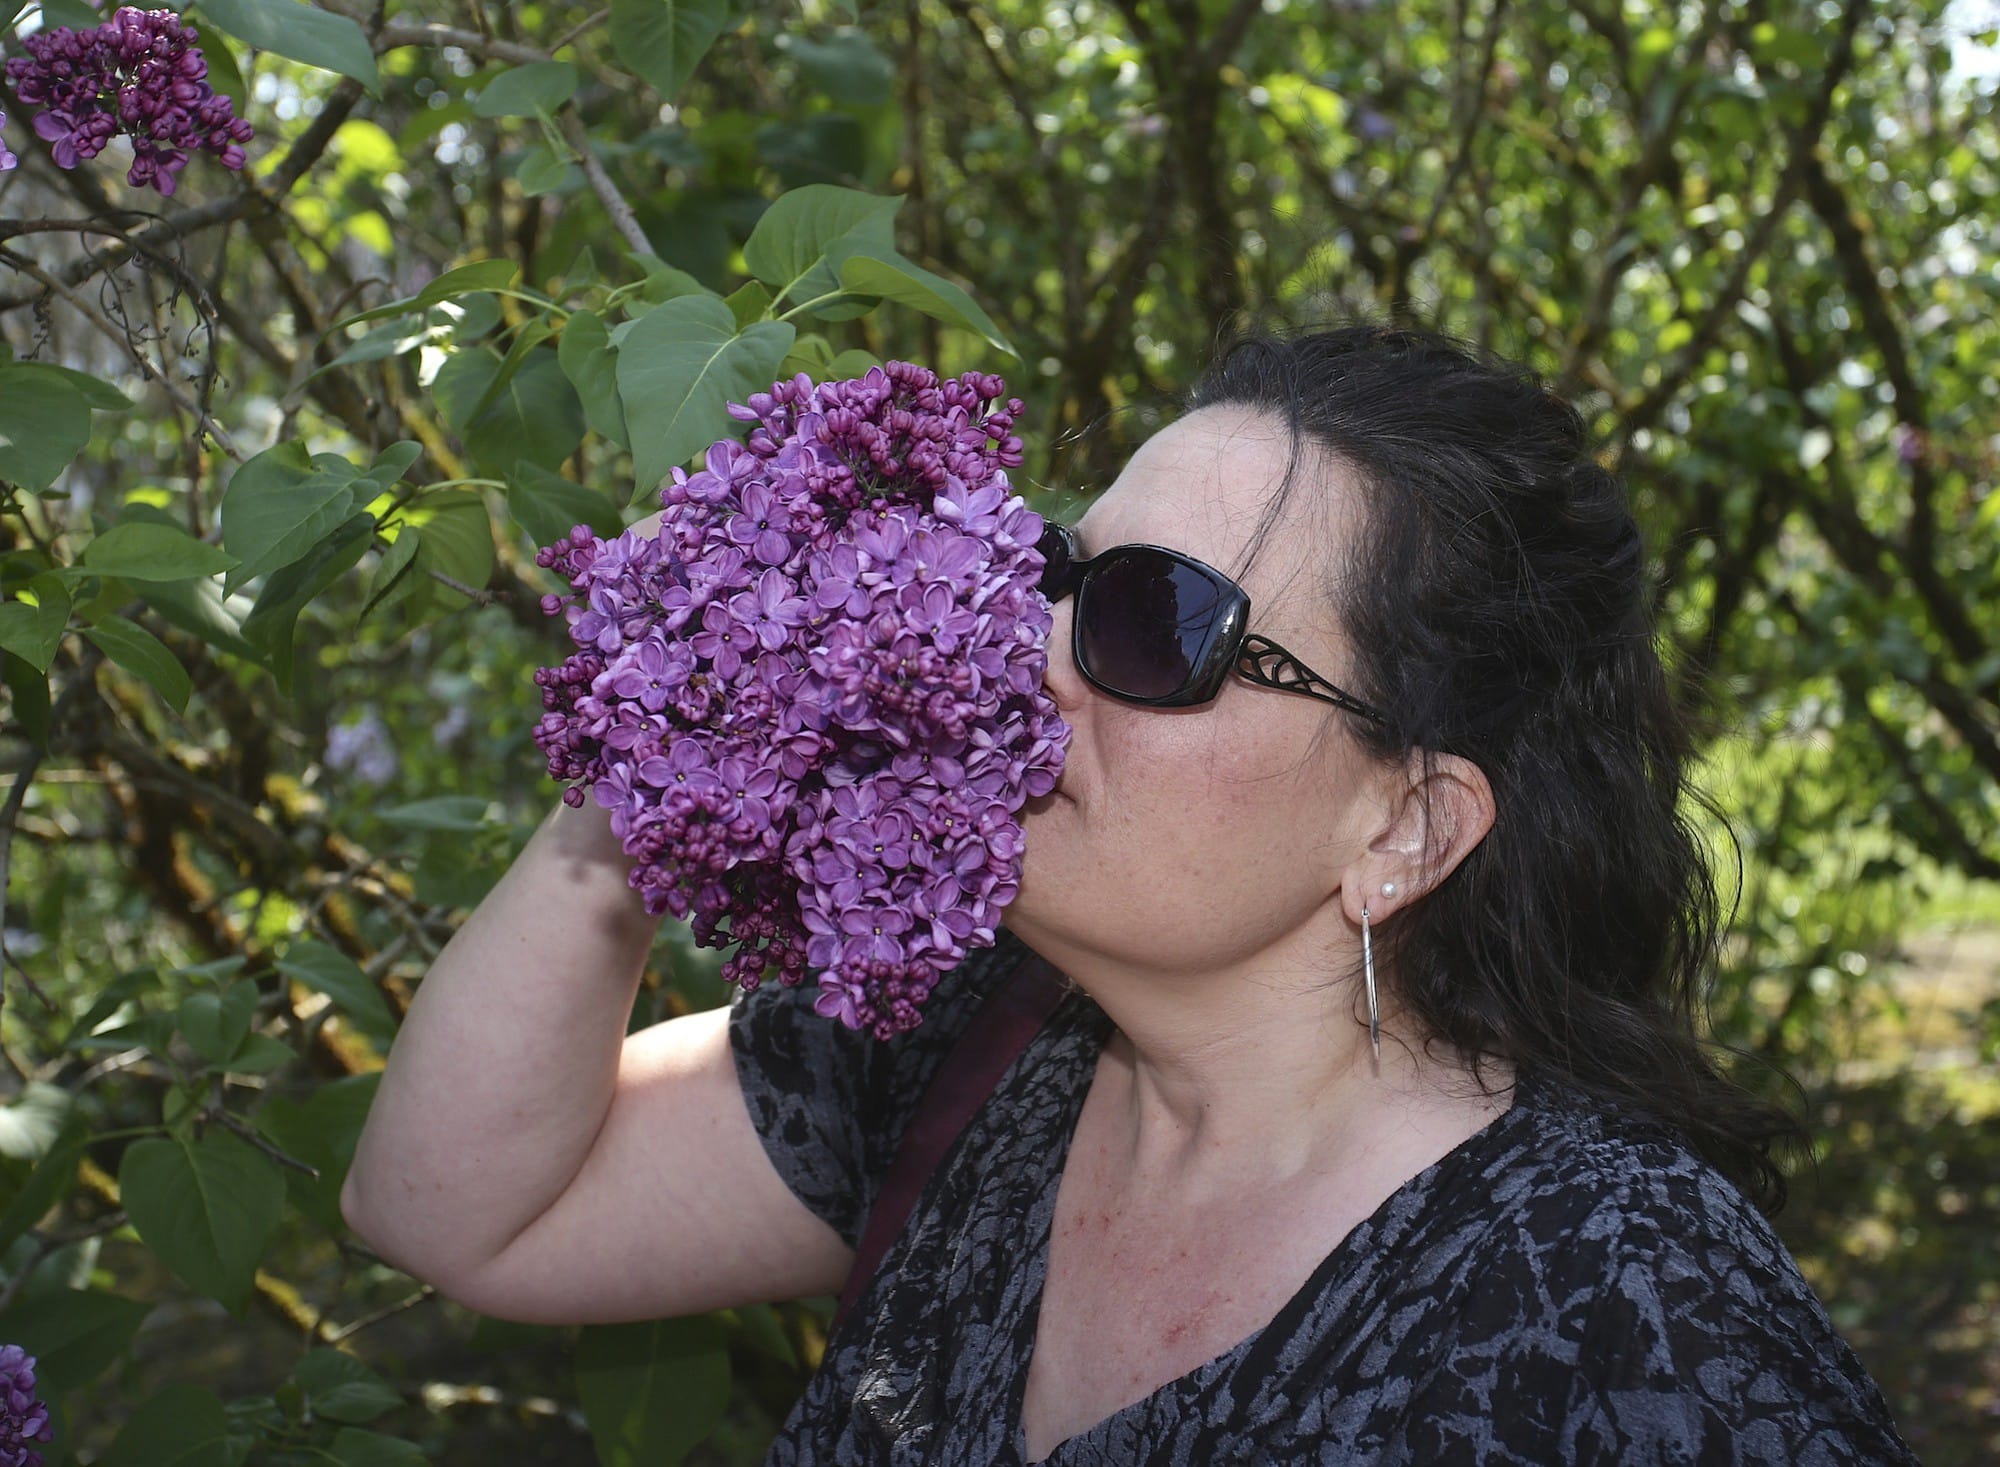 Amy Caulder of Salem, Ore., enjoys a lilac variety called Glory on Sunday at the Hulda Klager Lilac Gardens in Woodland. The lilac gardens display many varieties of the flower, as well as the Victorian farmhouse once belonging to lilac hybridizer Hulda Klager.